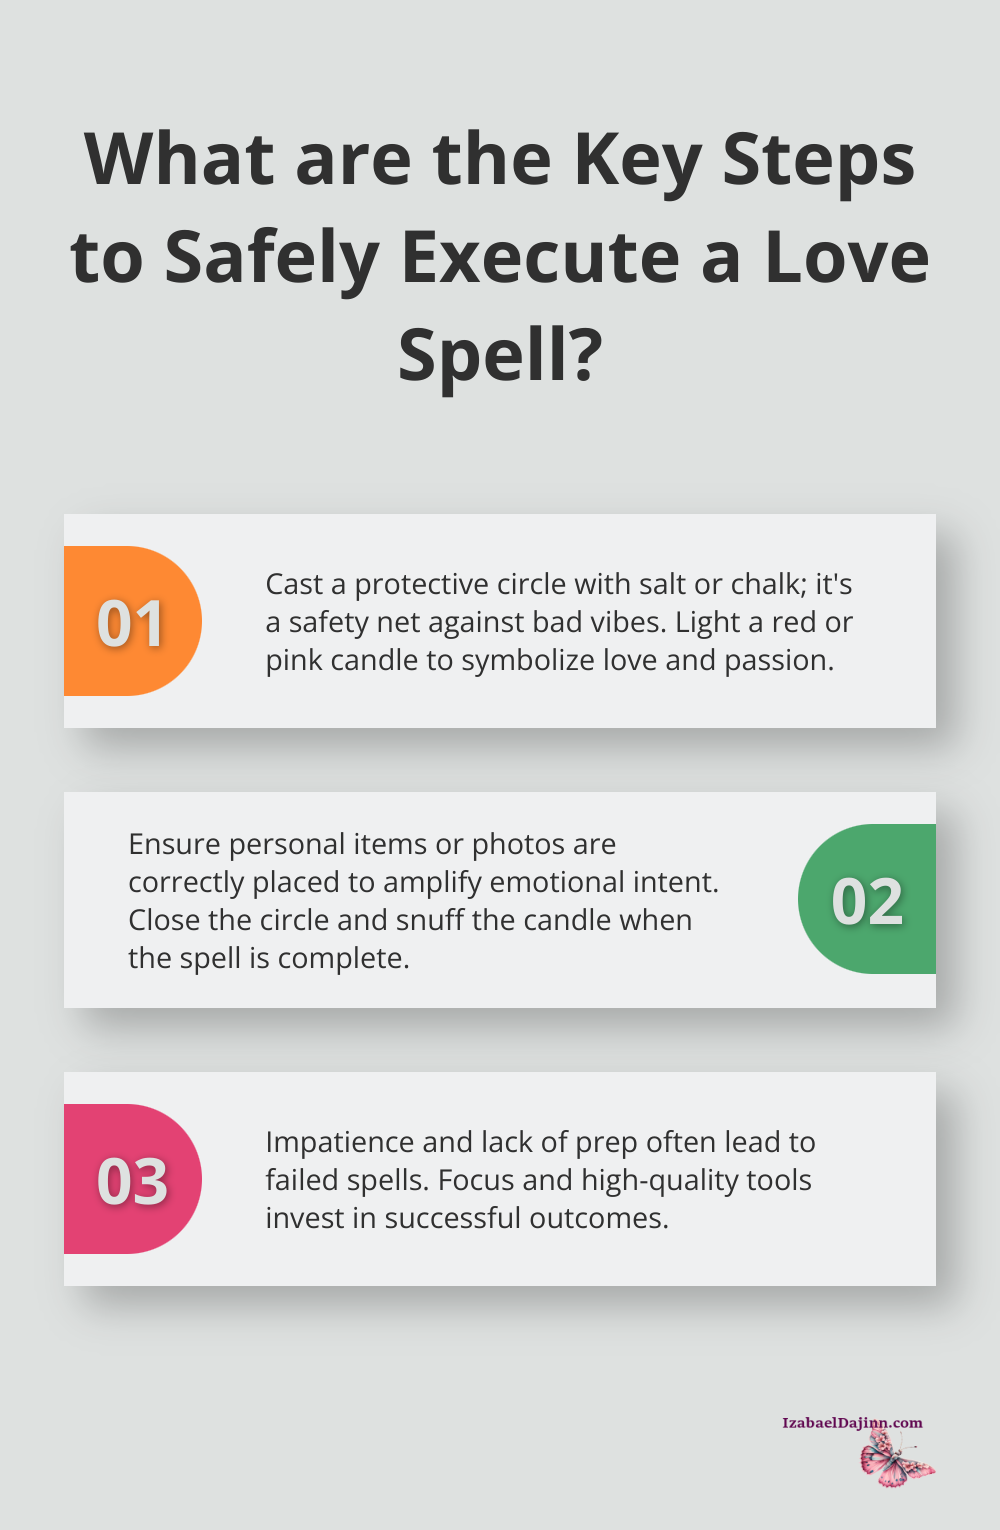 Fact - What are the Key Steps to Safely Execute a Love Spell?